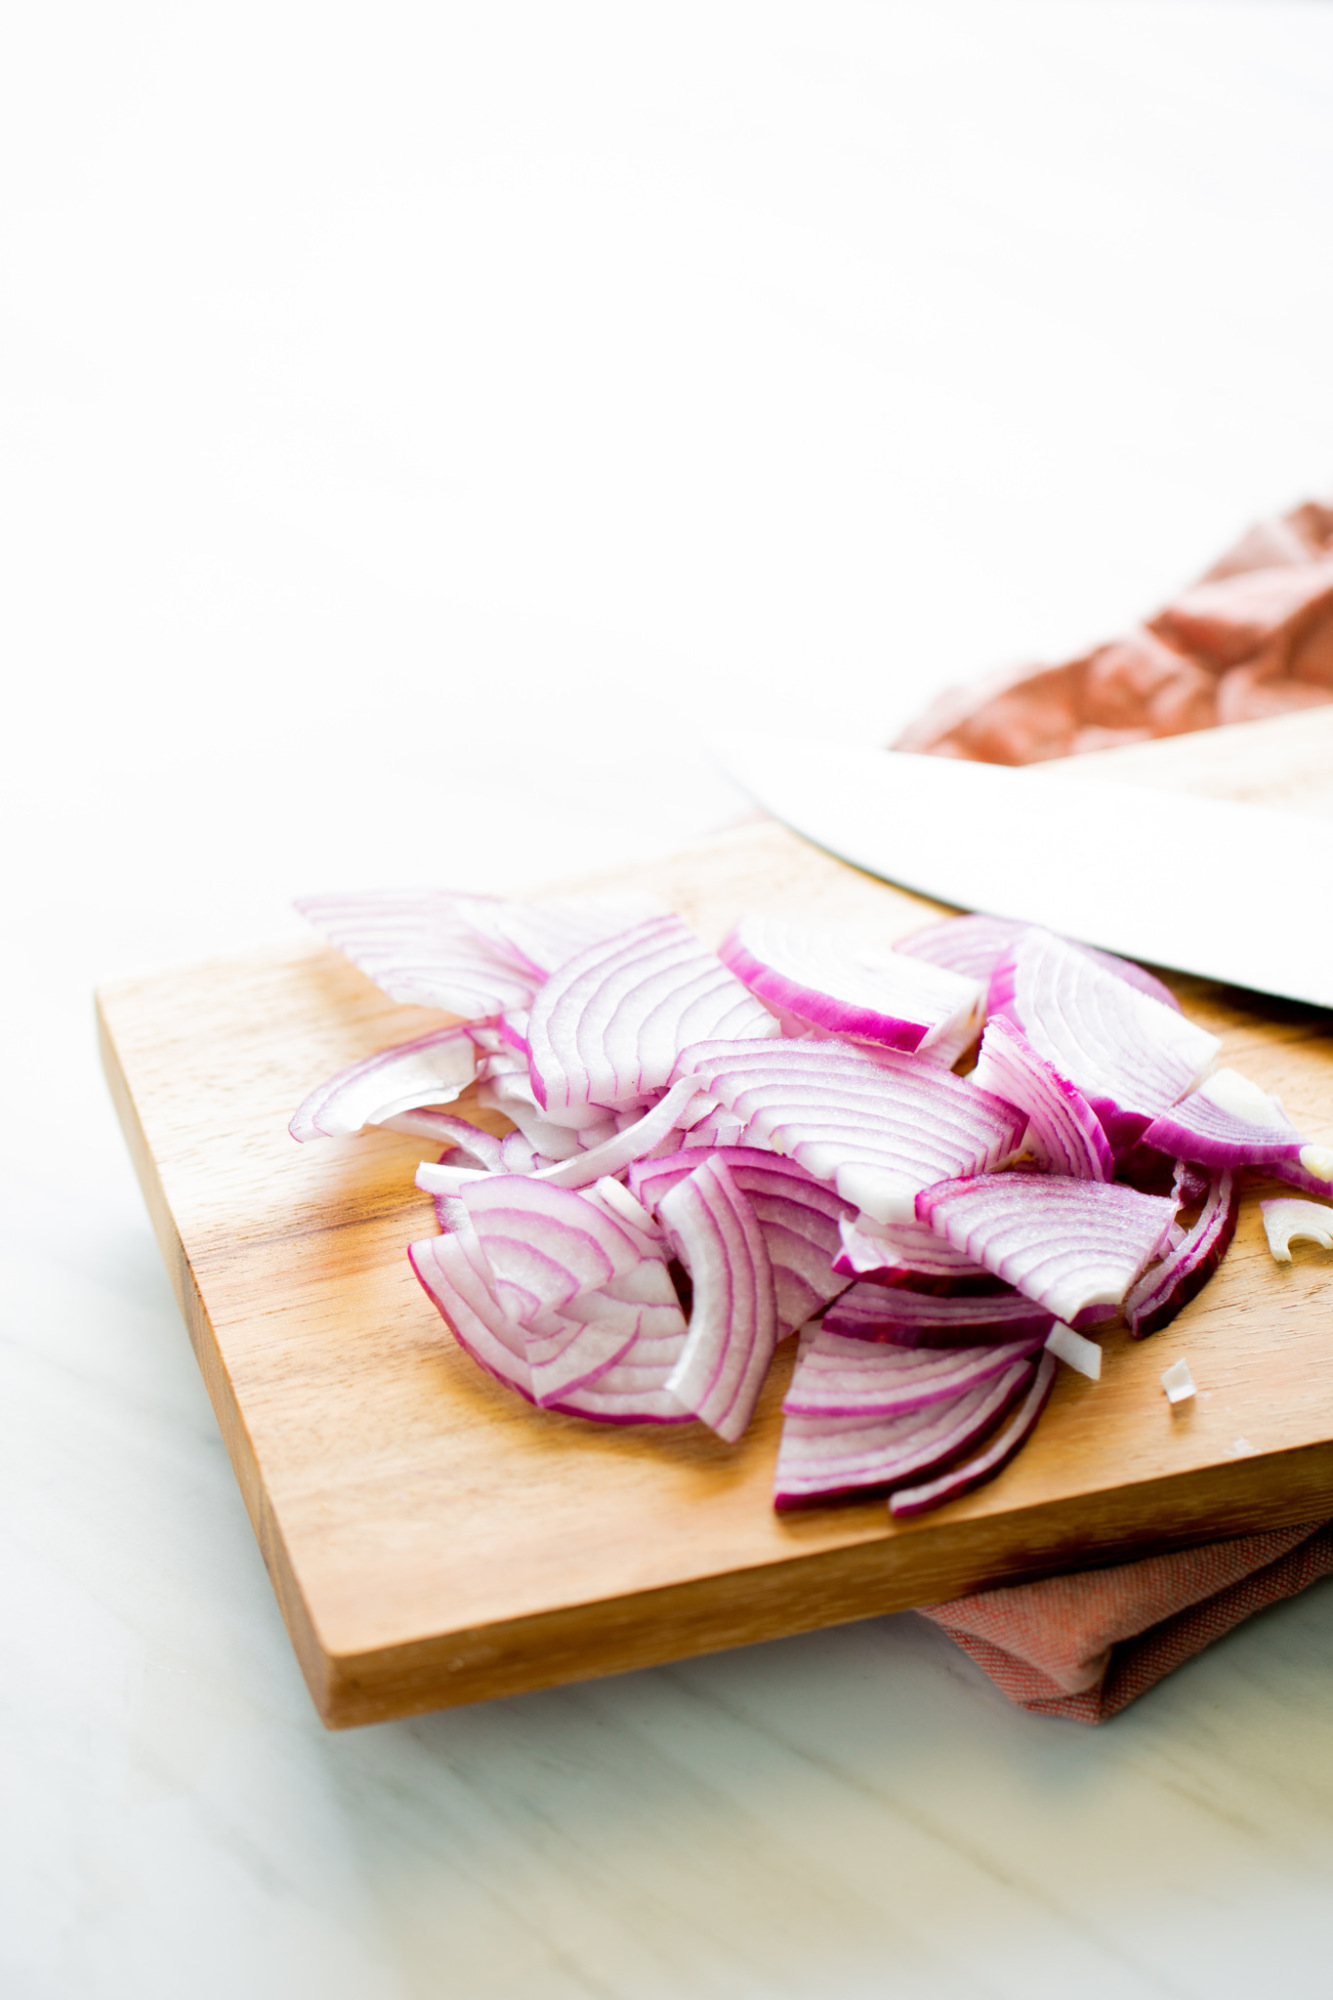  Mexican pickled red onions